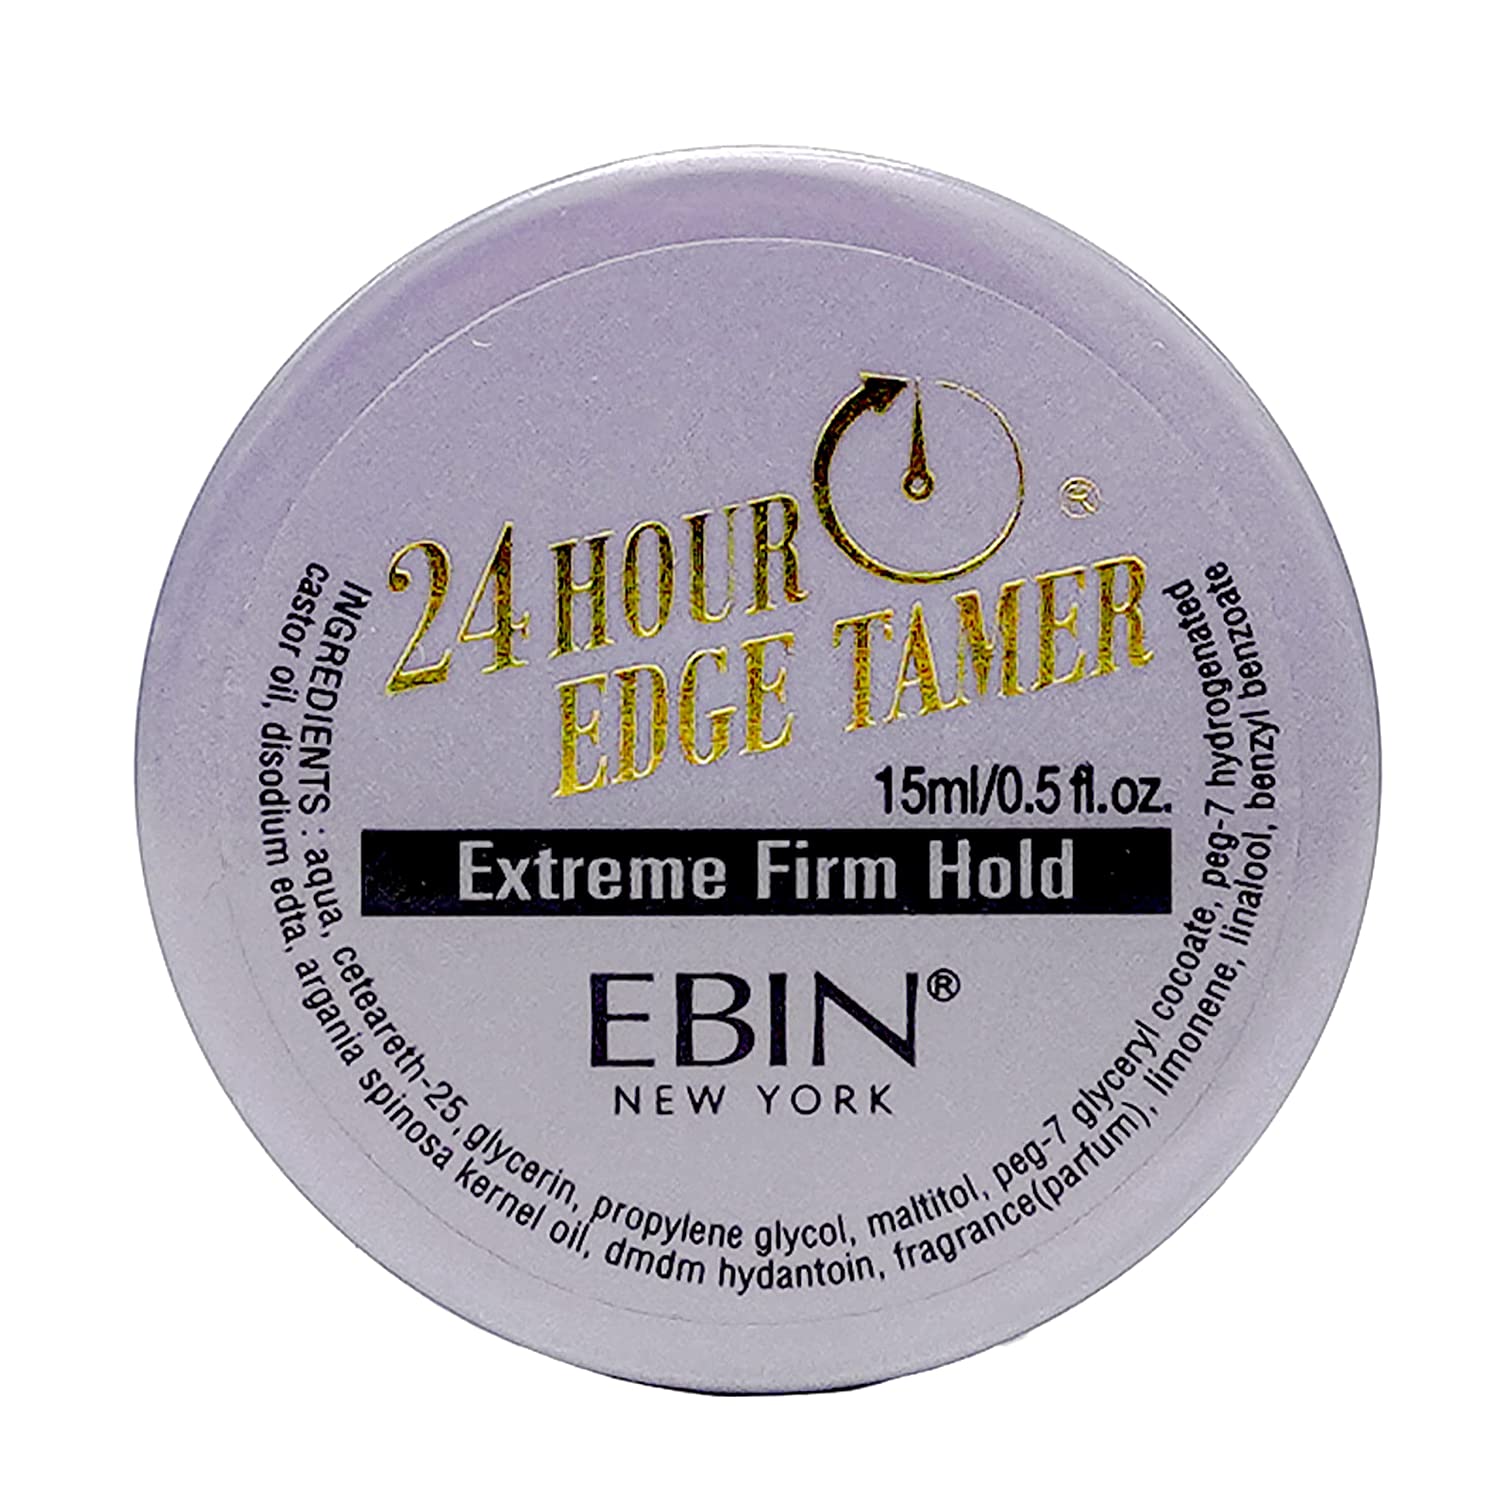 EBIN NEW YORK 24 Hour Edge Tamer - Extreme Firm Hold (0.5oz/ 15ml) - No Flaking, White Residue, Shine and Smooth texture with Argan Oil and Castor Oil Find Your New Look Today!